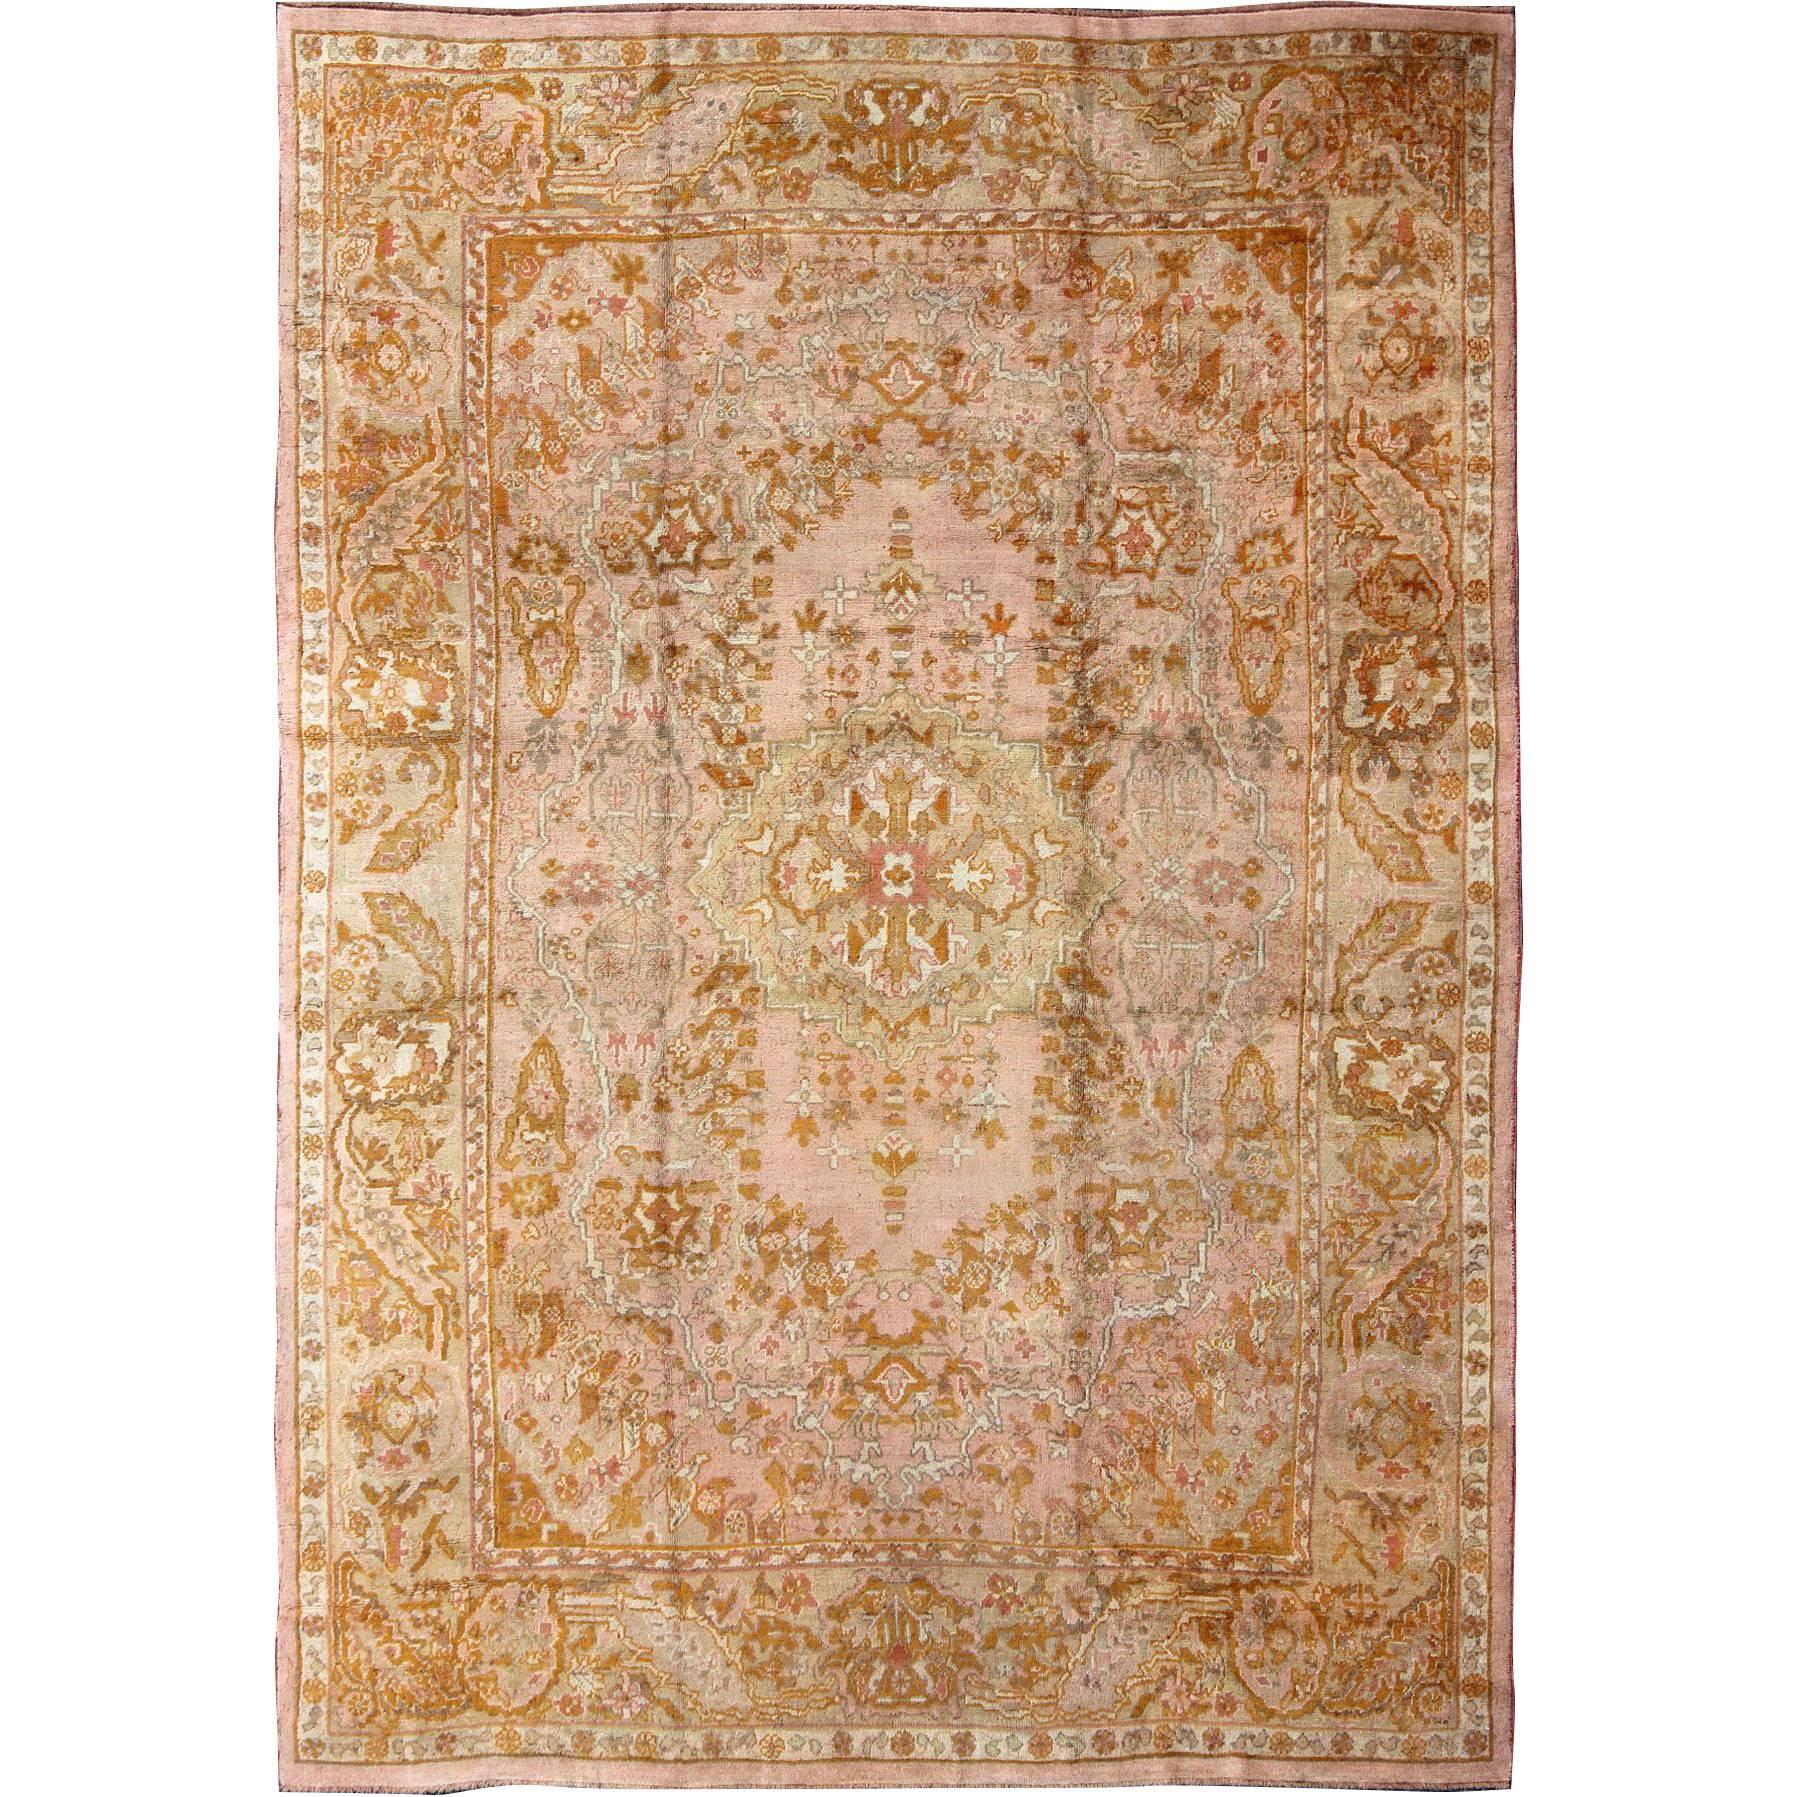 Antique Oushak Rug with Floral Pattern in Pink, Orange and Light Green 